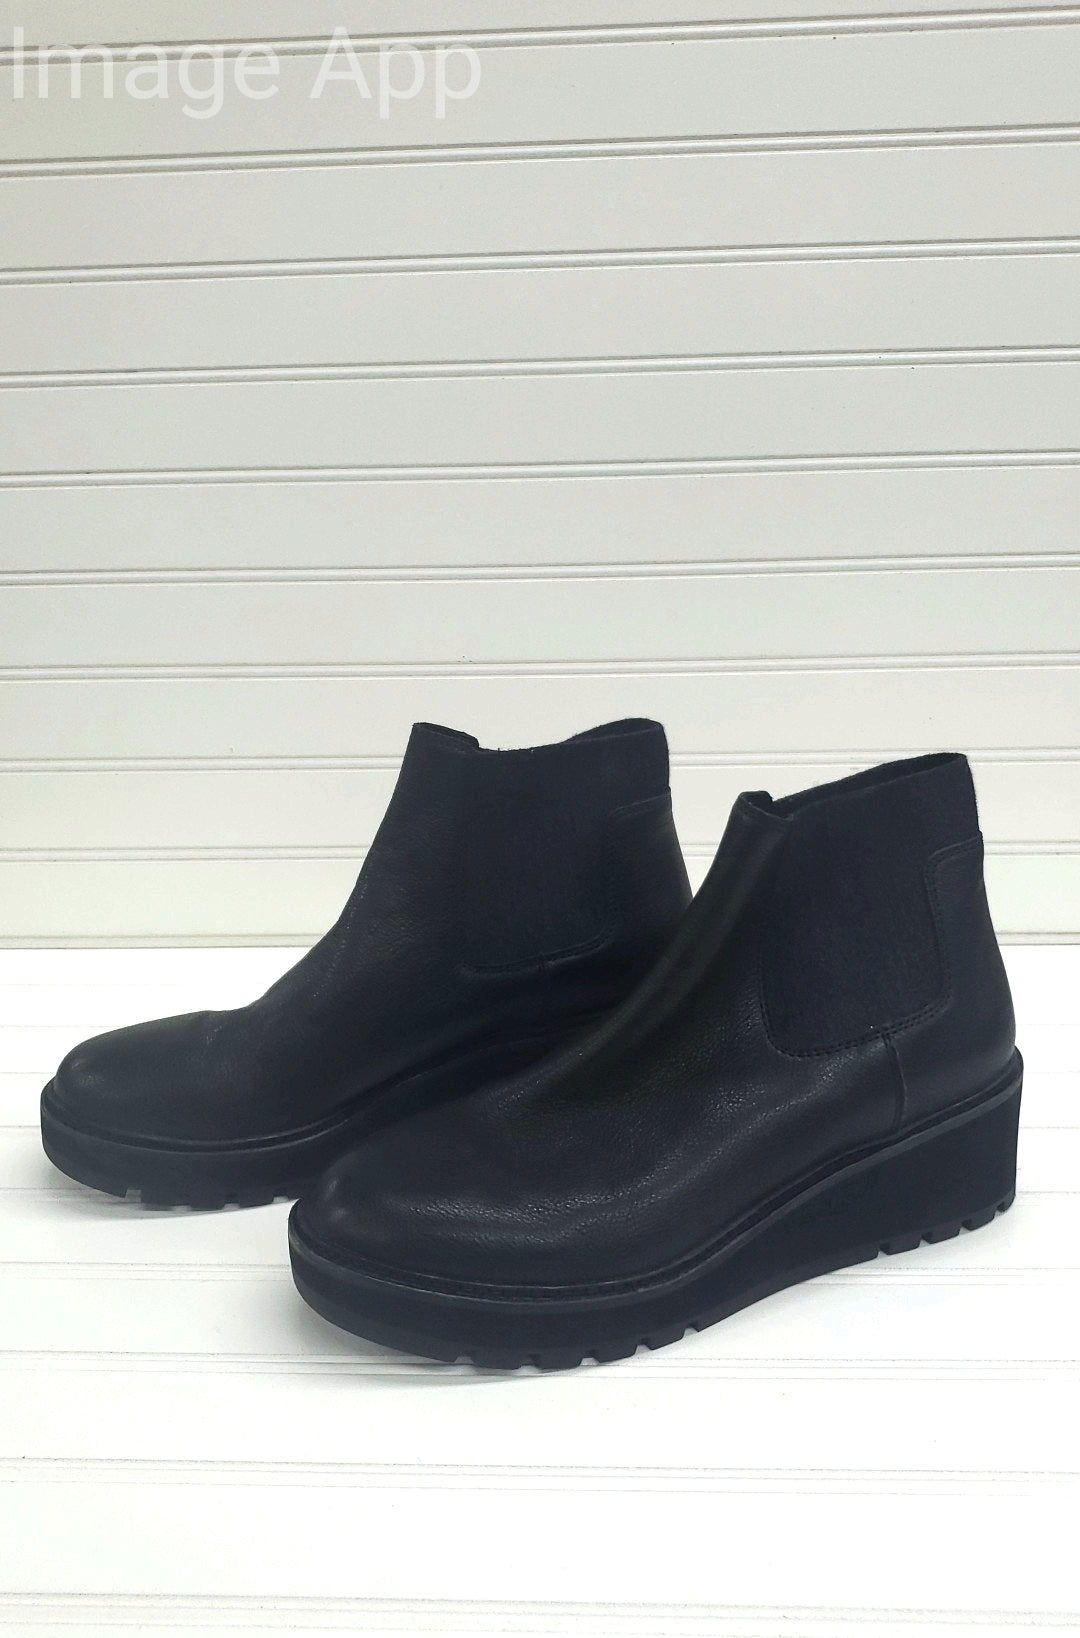 Eileen Fisher Chelsea Boot Size 9.5 1E